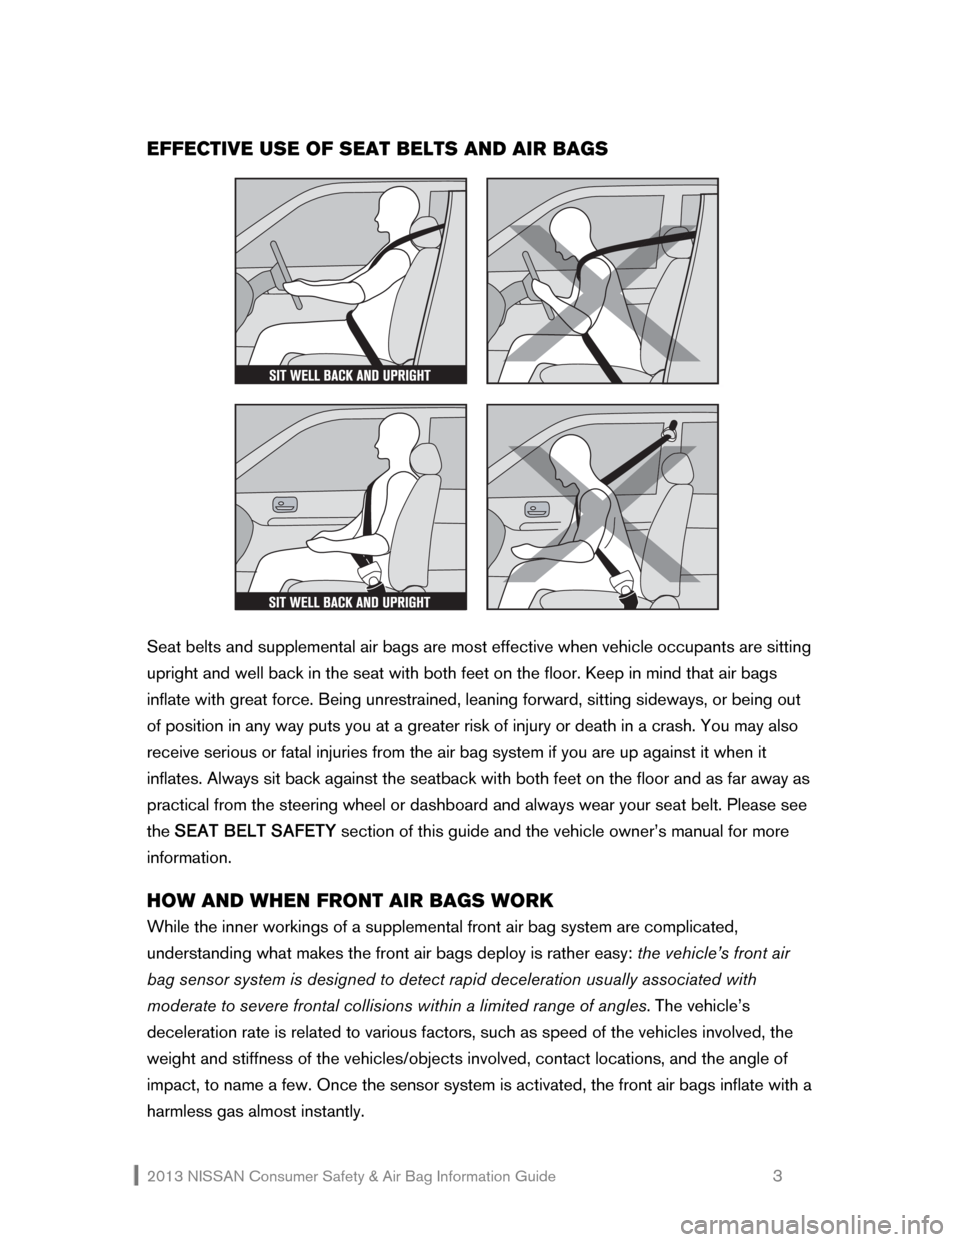 NISSAN FRONTIER 2013 D40 / 2.G Consumer Safety Air Bag Information Guide 2013 NISSAN Consumer Safety & Air Bag Information Guide                                                   3 
EFFECTIVE USE OF SEAT BELTS AND AIR BAGS 
 
 
 
Seat belts and supplemental air bags are mo